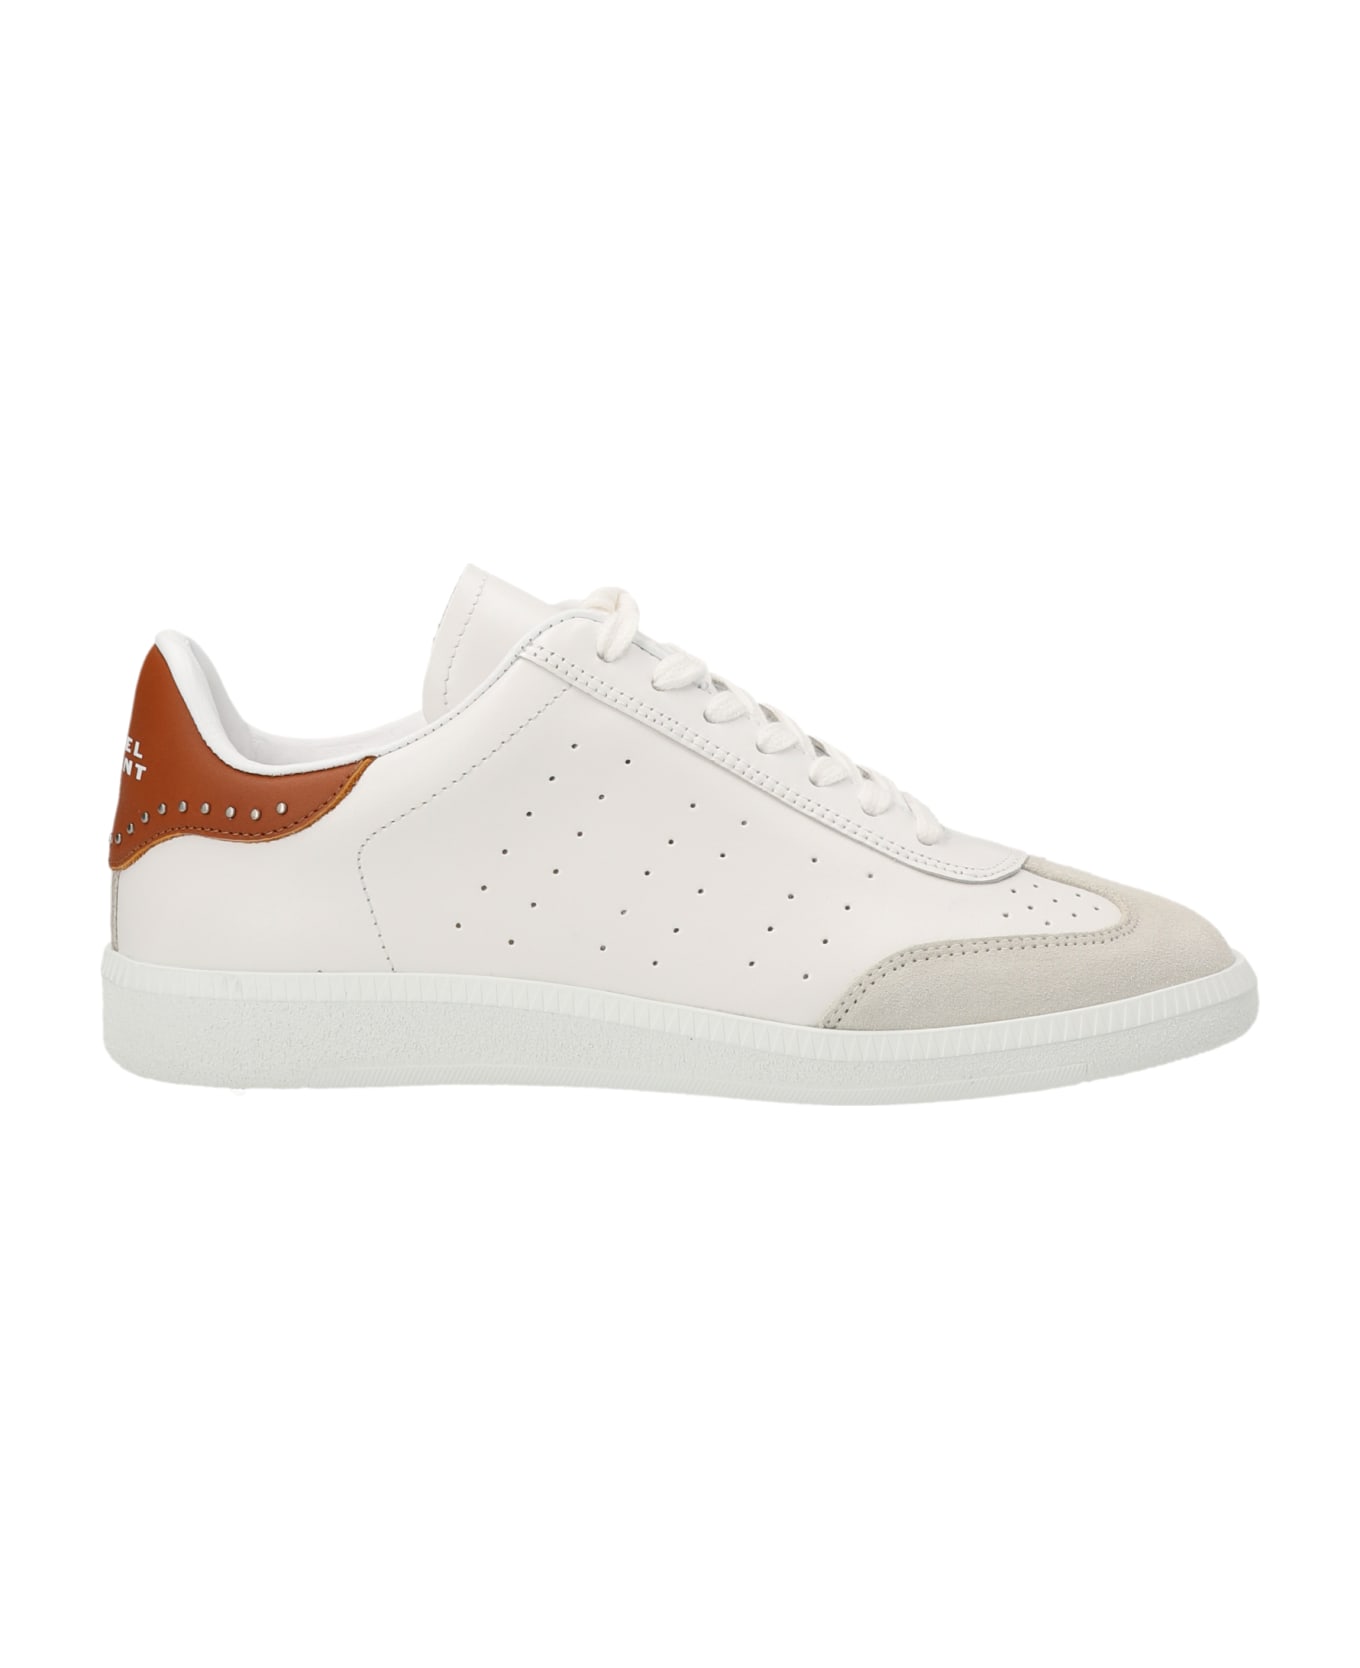 Isabel Marant Bryce Leather Sneakers - Leather Brown